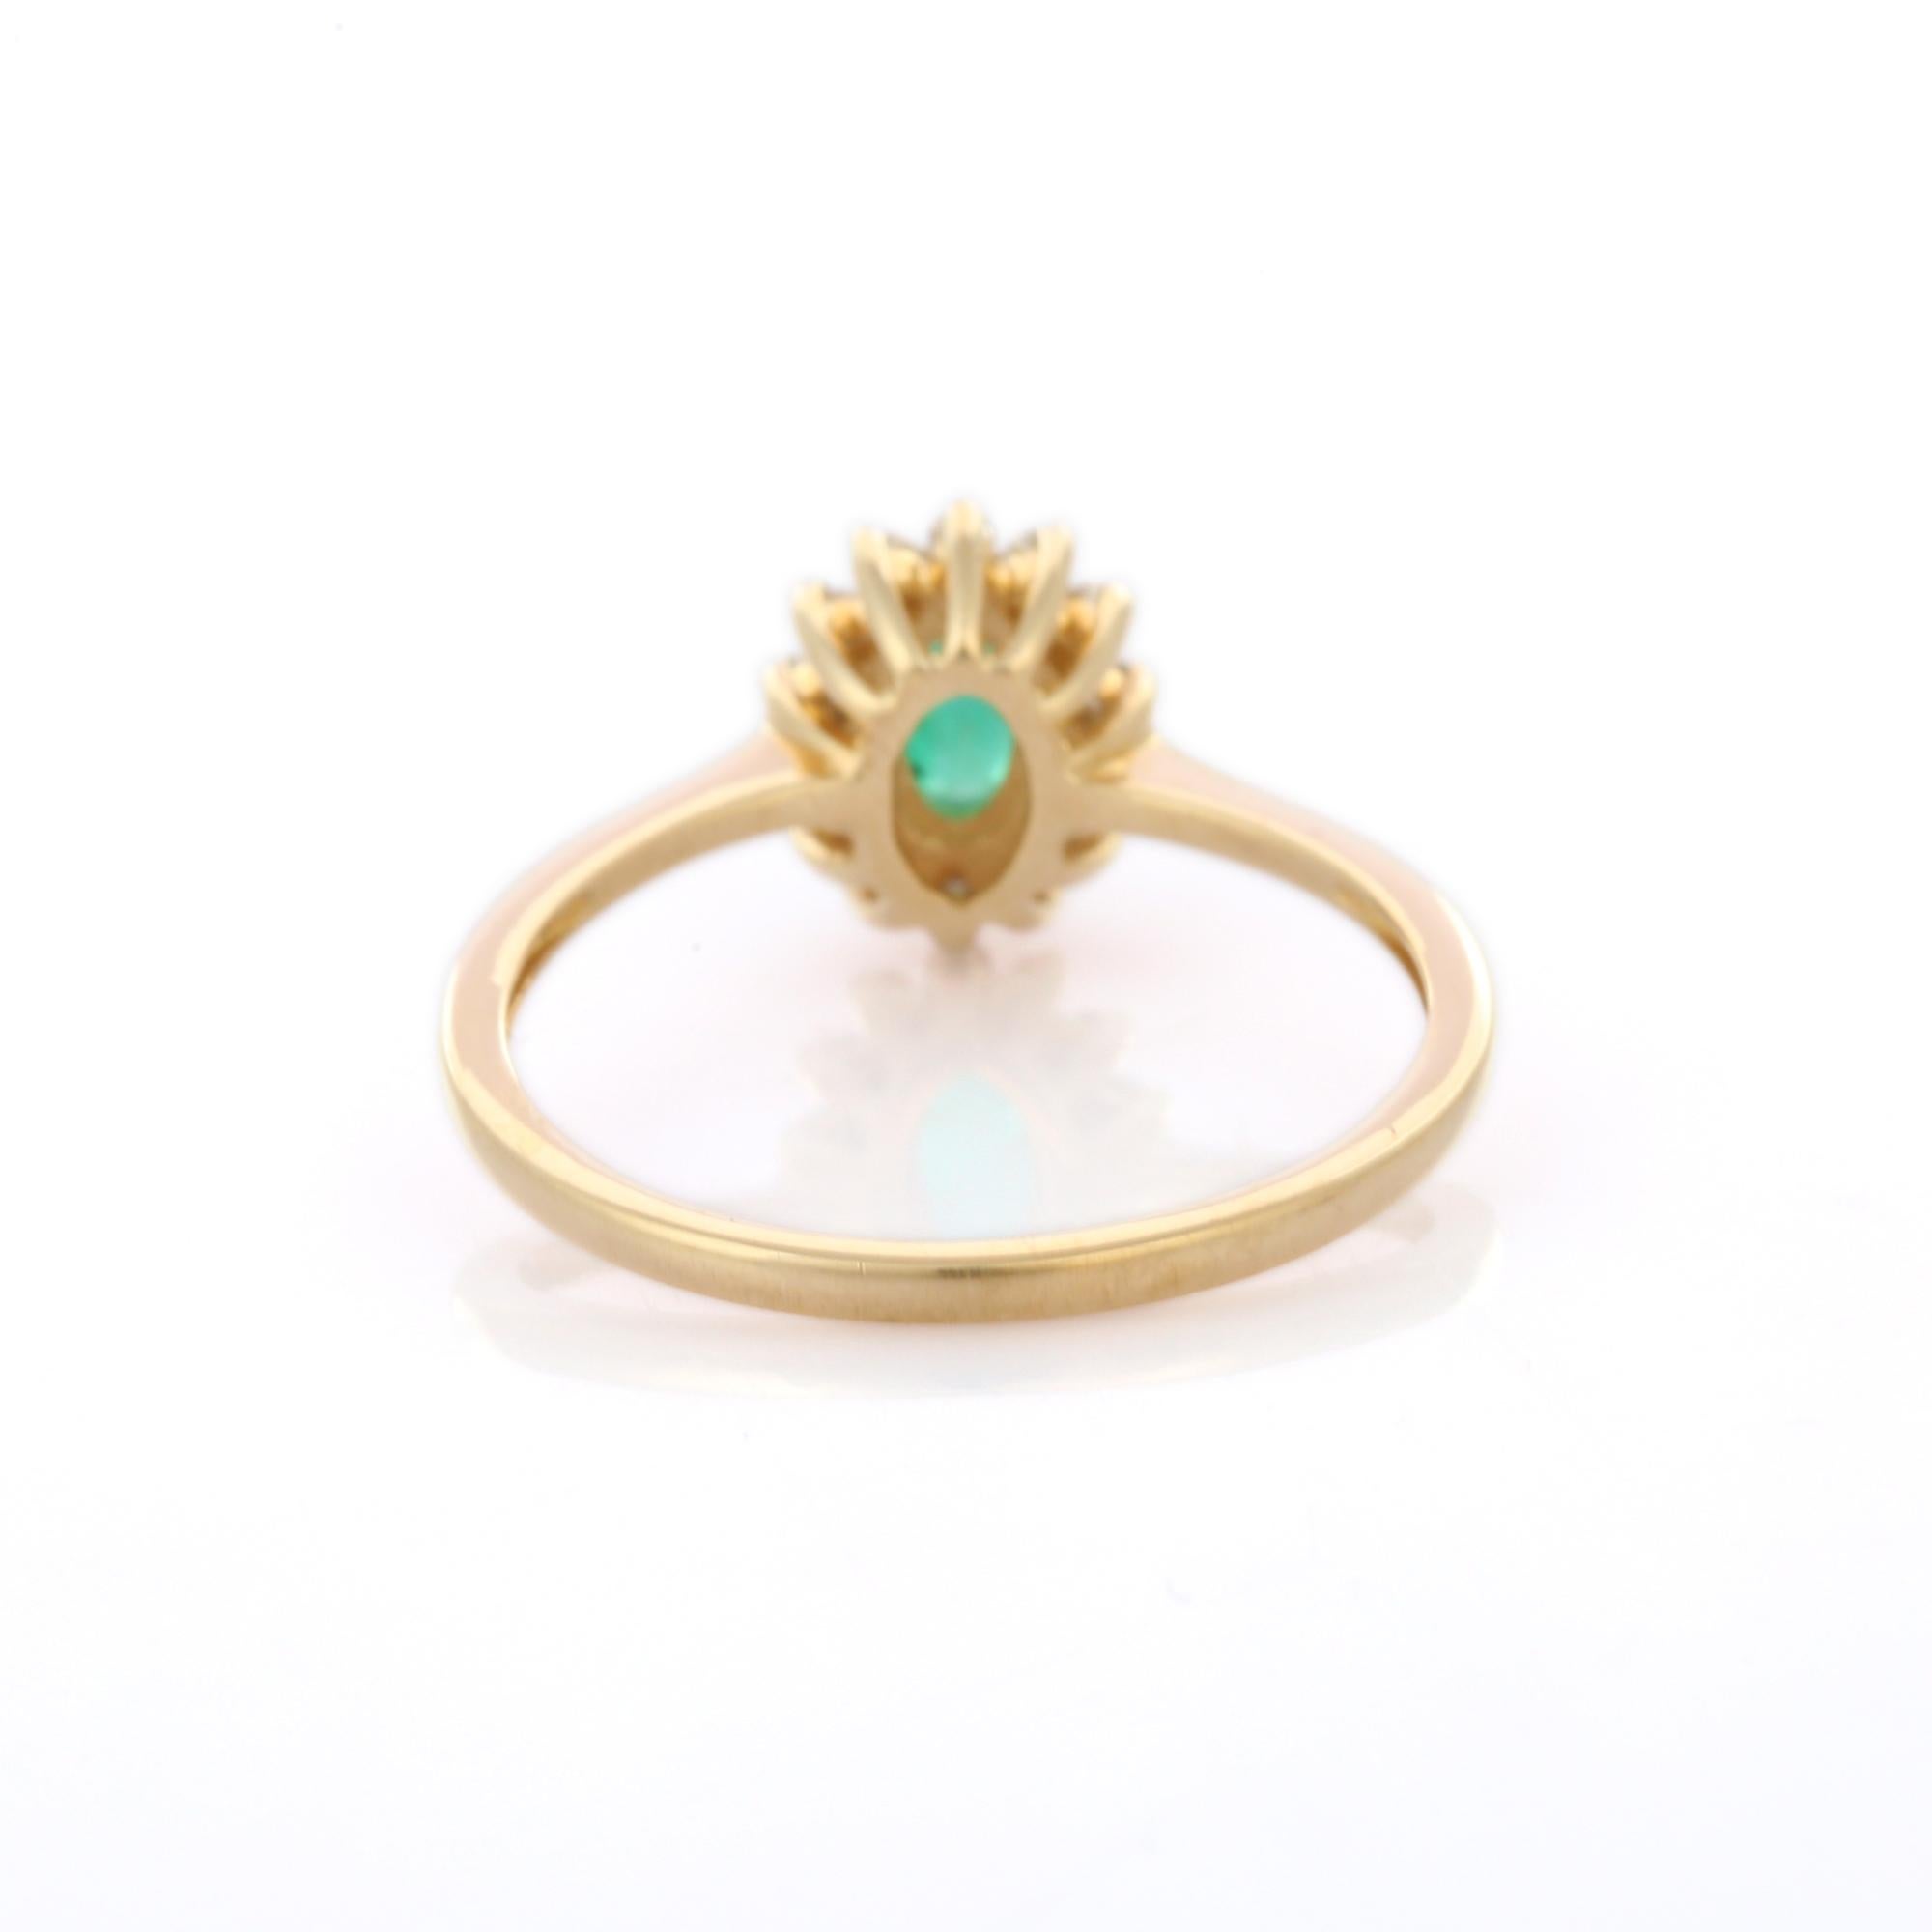 For Sale:  14K Yellow Gold Ring with Oval Cut Emerald and Diamonds, Emerald Halo Ring 3